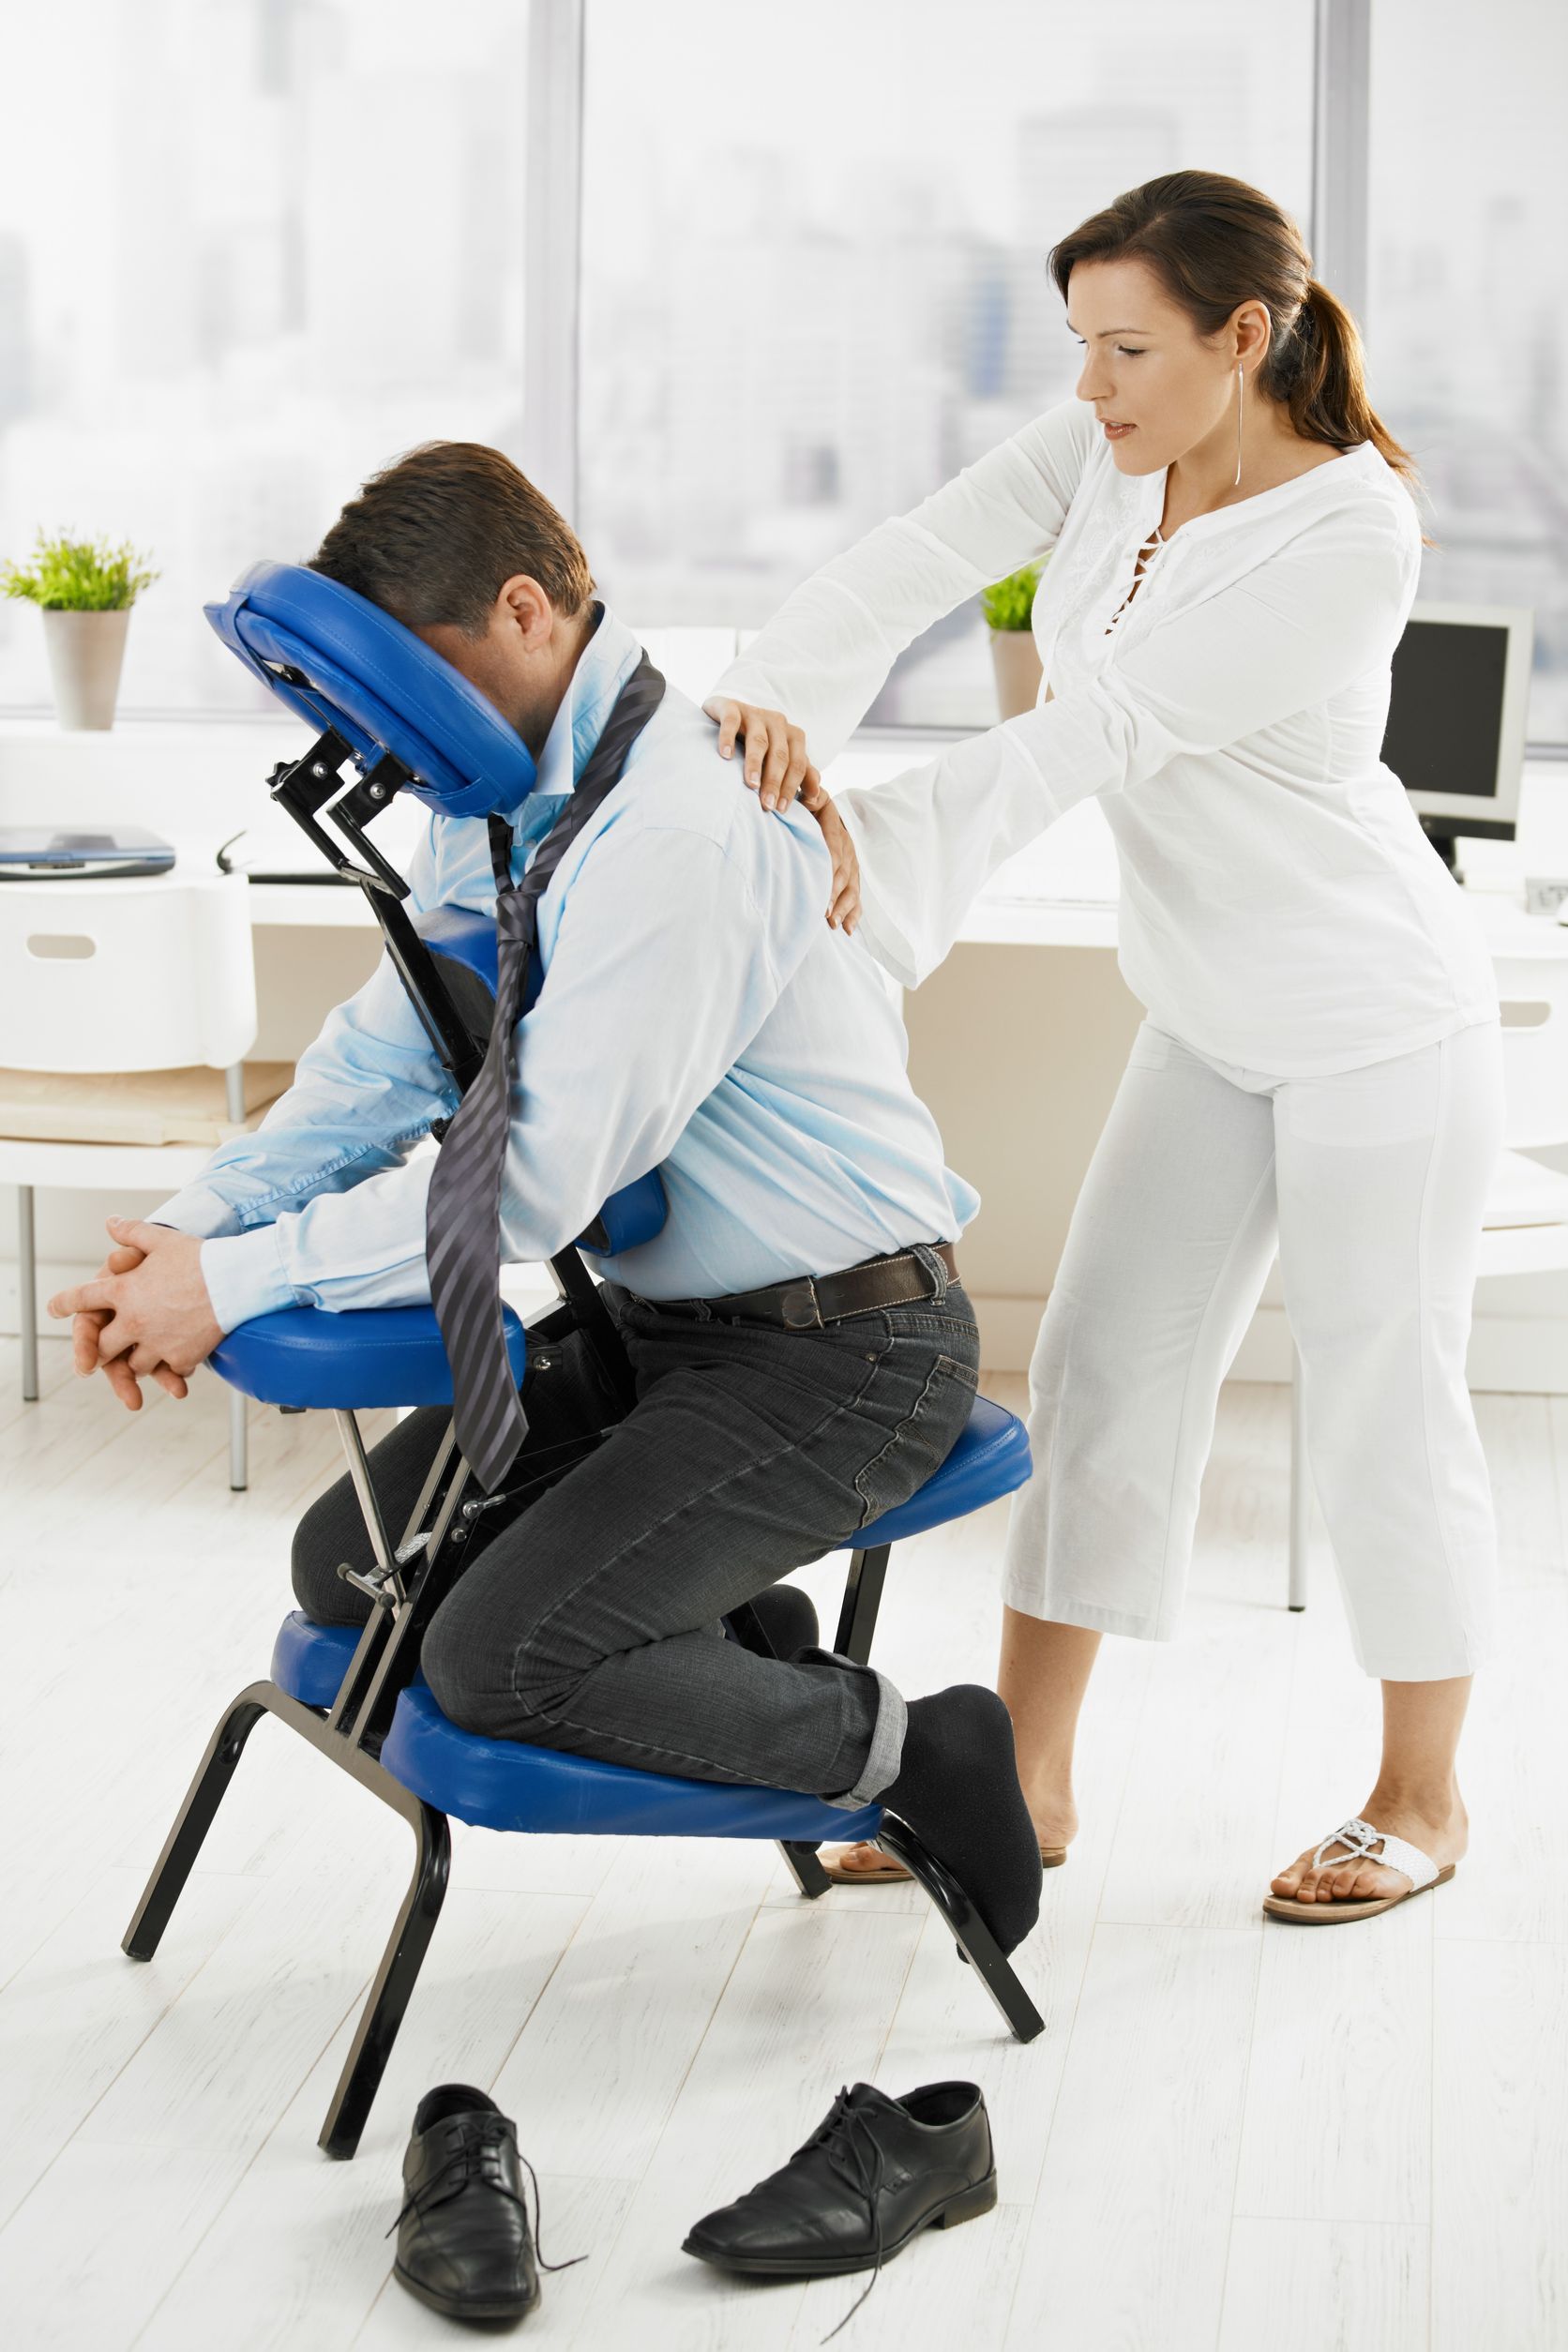 Therapy Works – Chair Massage in the Workplace